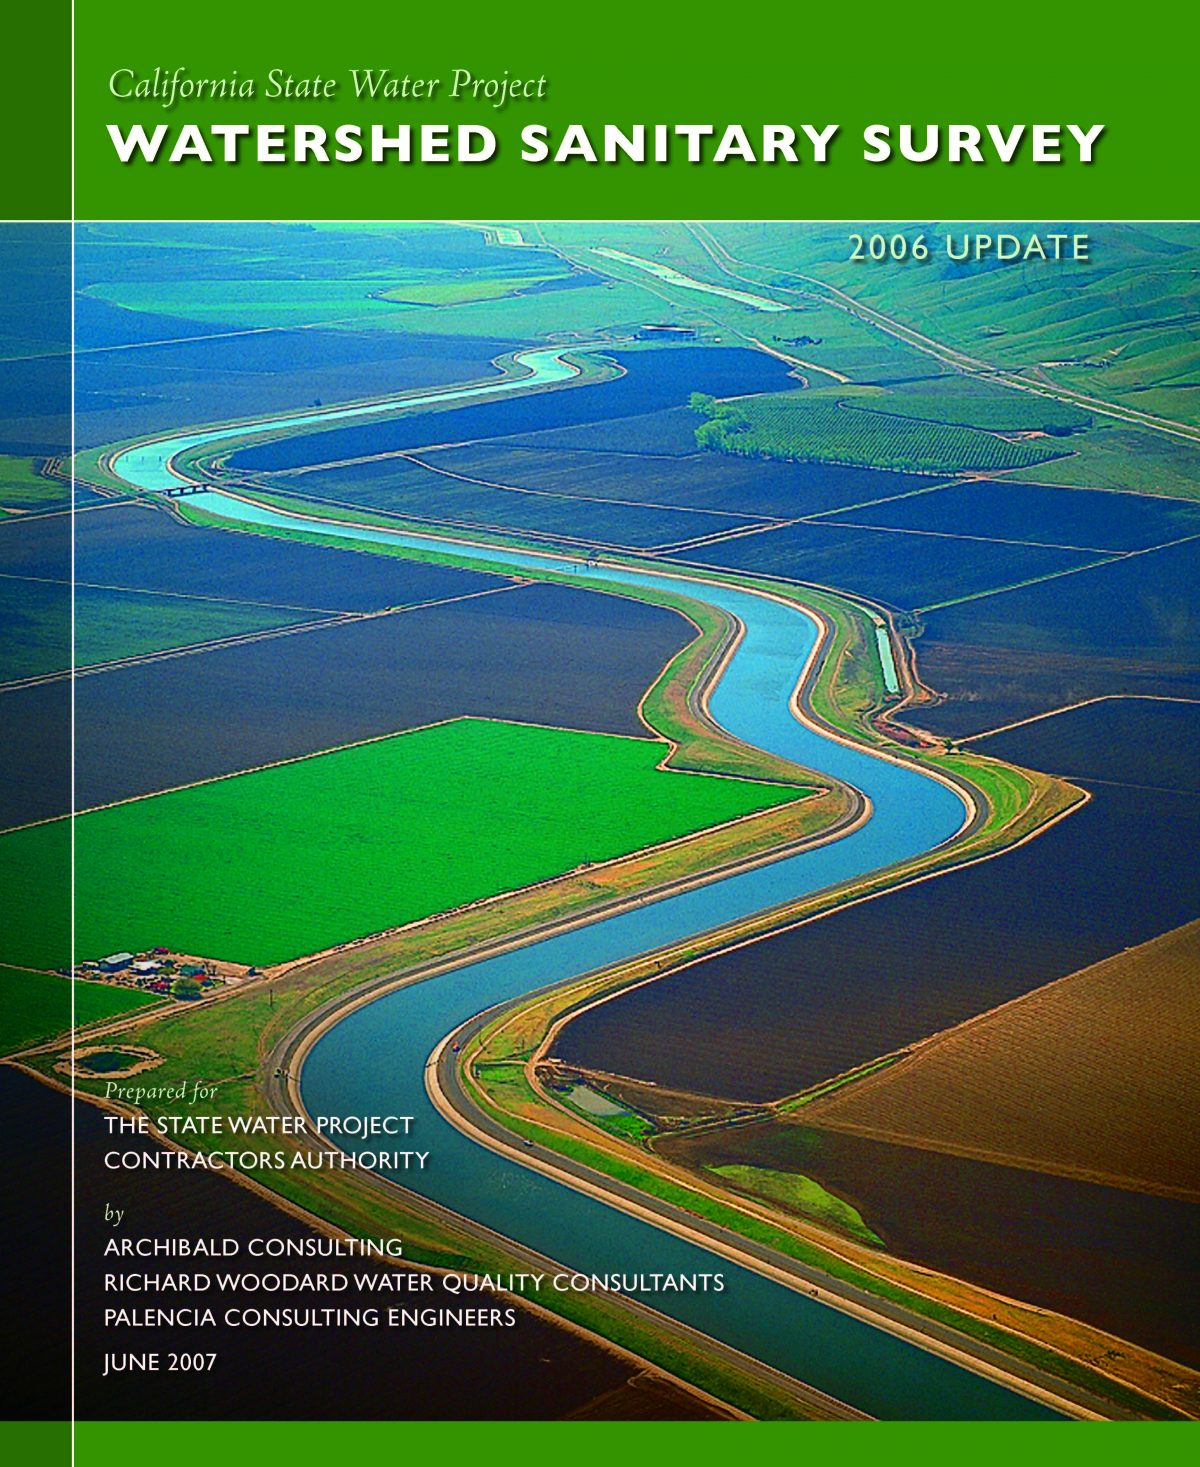 California State Water Project 2006 Watershed Sanitary Survey Update